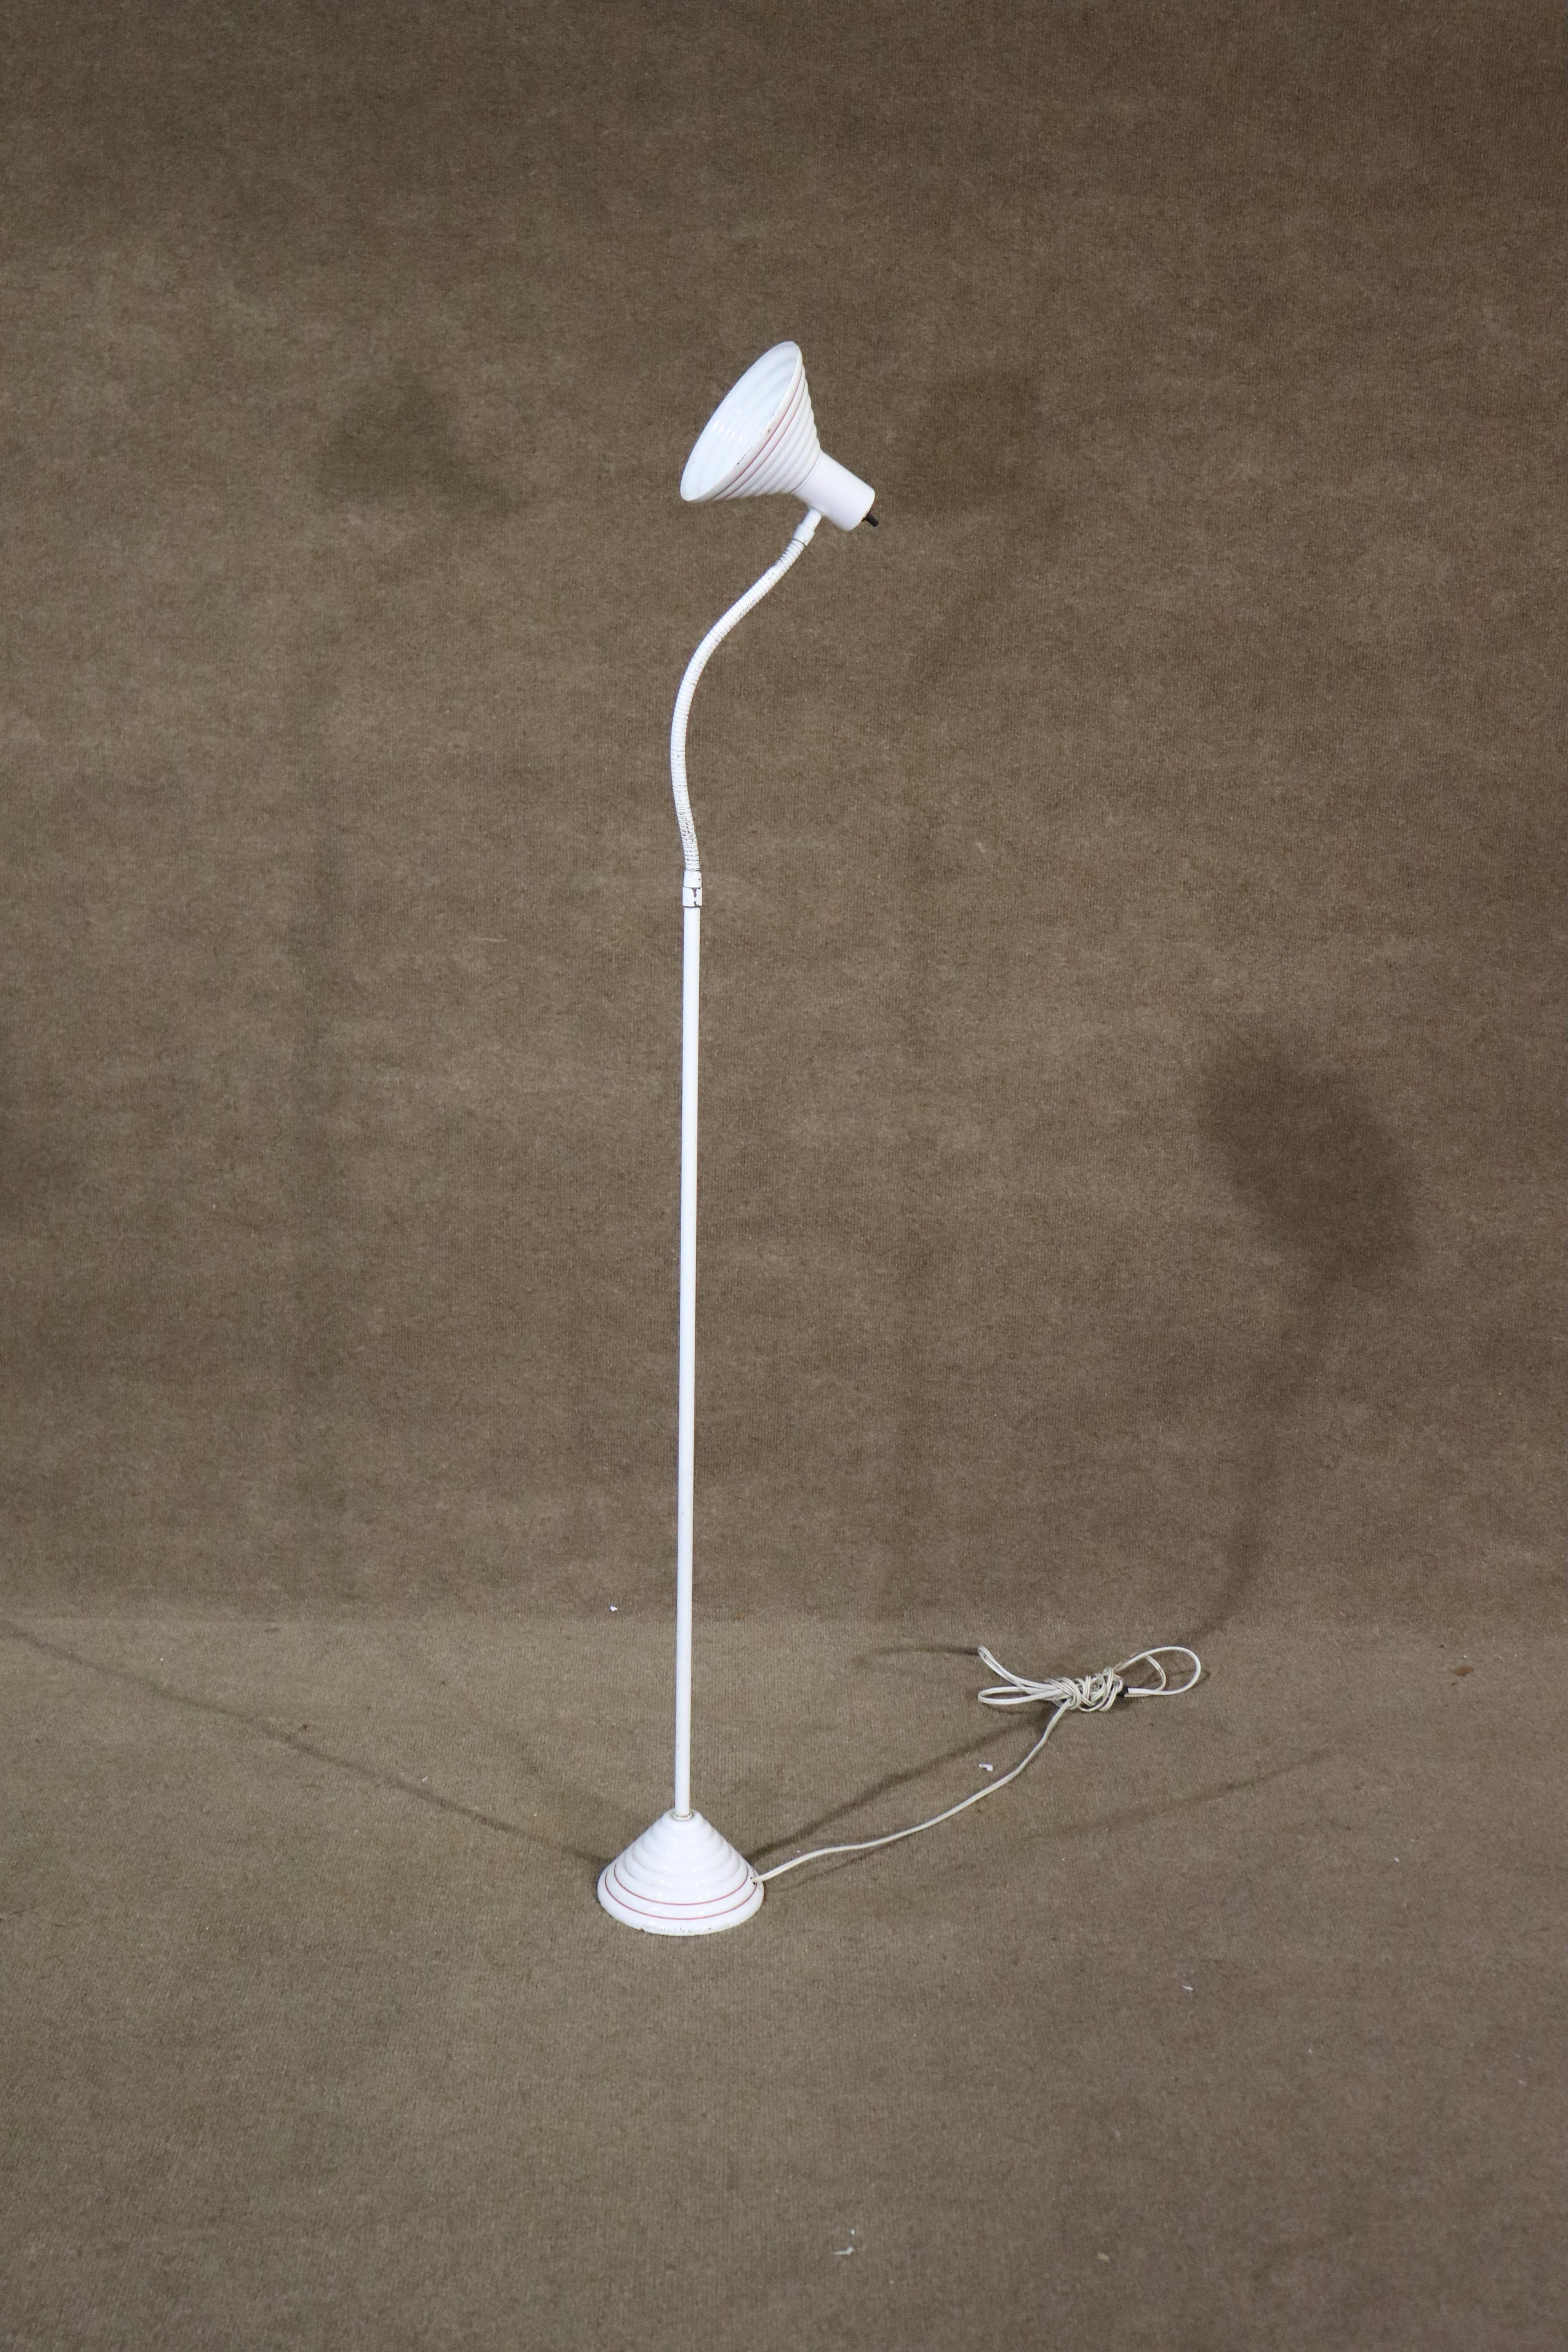 Tall vintage floor lamp in white, with bendable head. Cone shade matches base shape. Movable shade gives lighting options to your room.
Please confirm location NY or NJ.